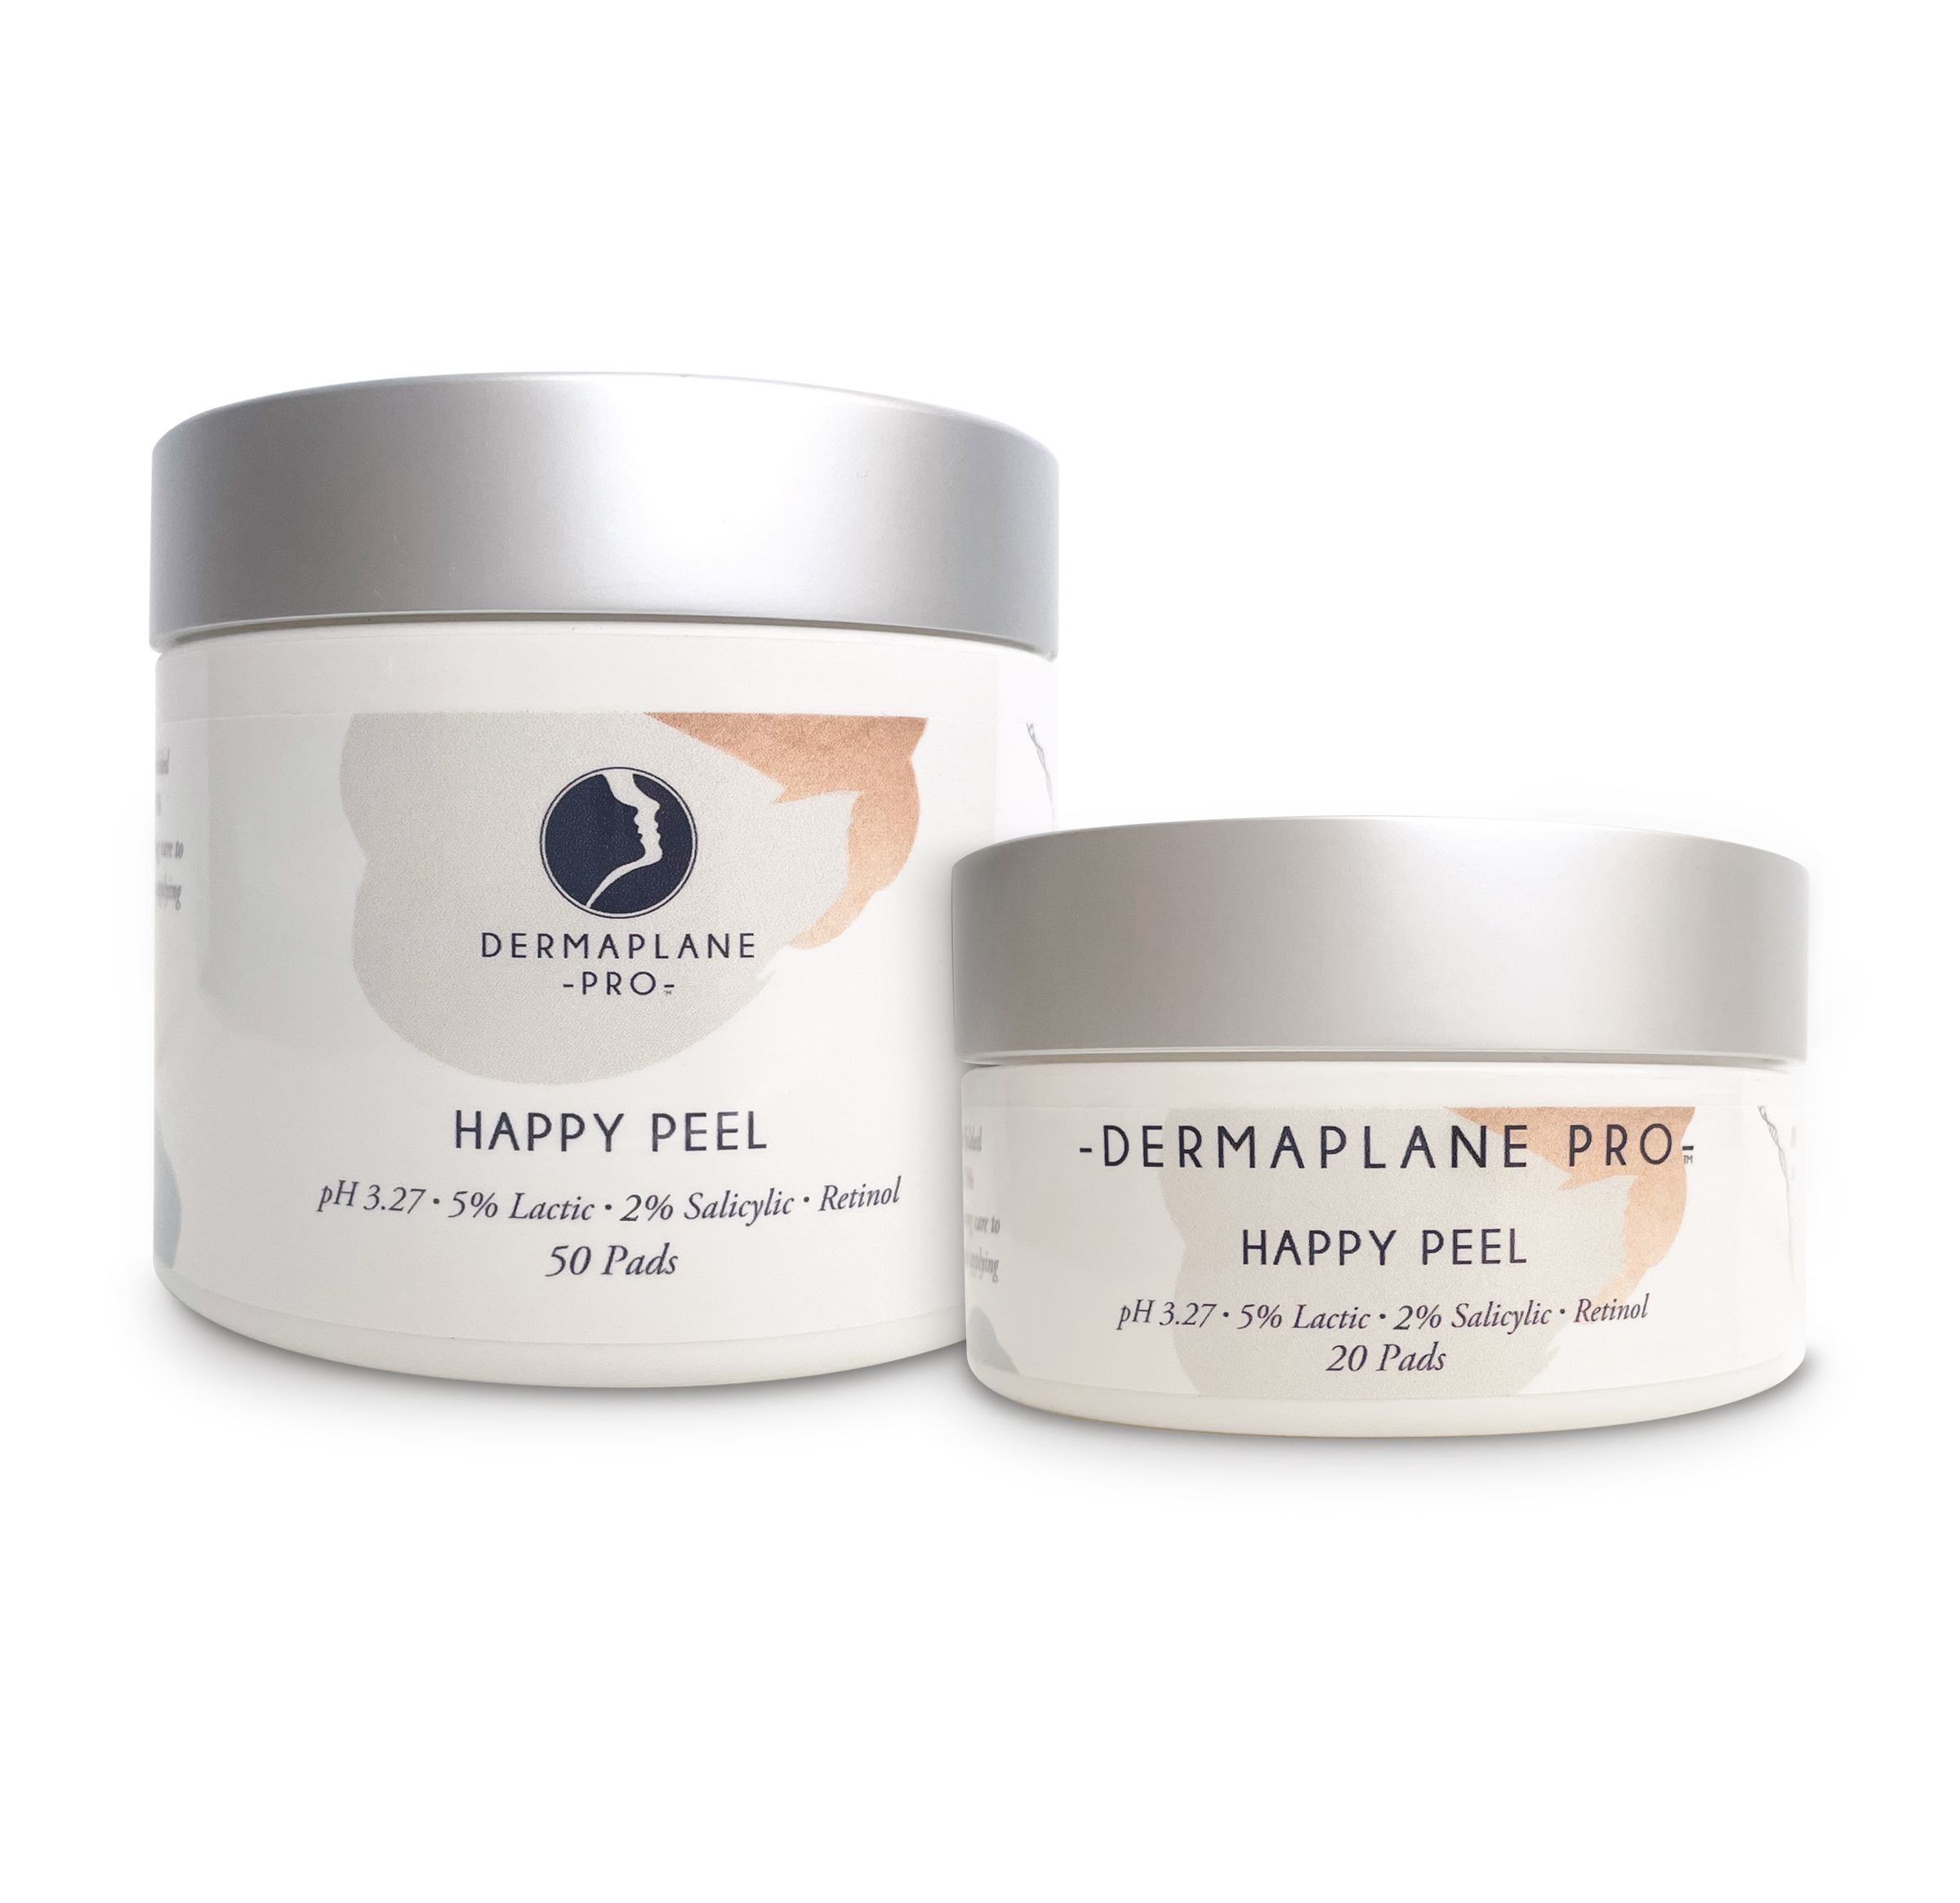 DermaplanePro Happy Peel 50 pads (4 oz) and 20 pads (2 oz). The perfect peel to use with dermaplaning. Jars on white background.